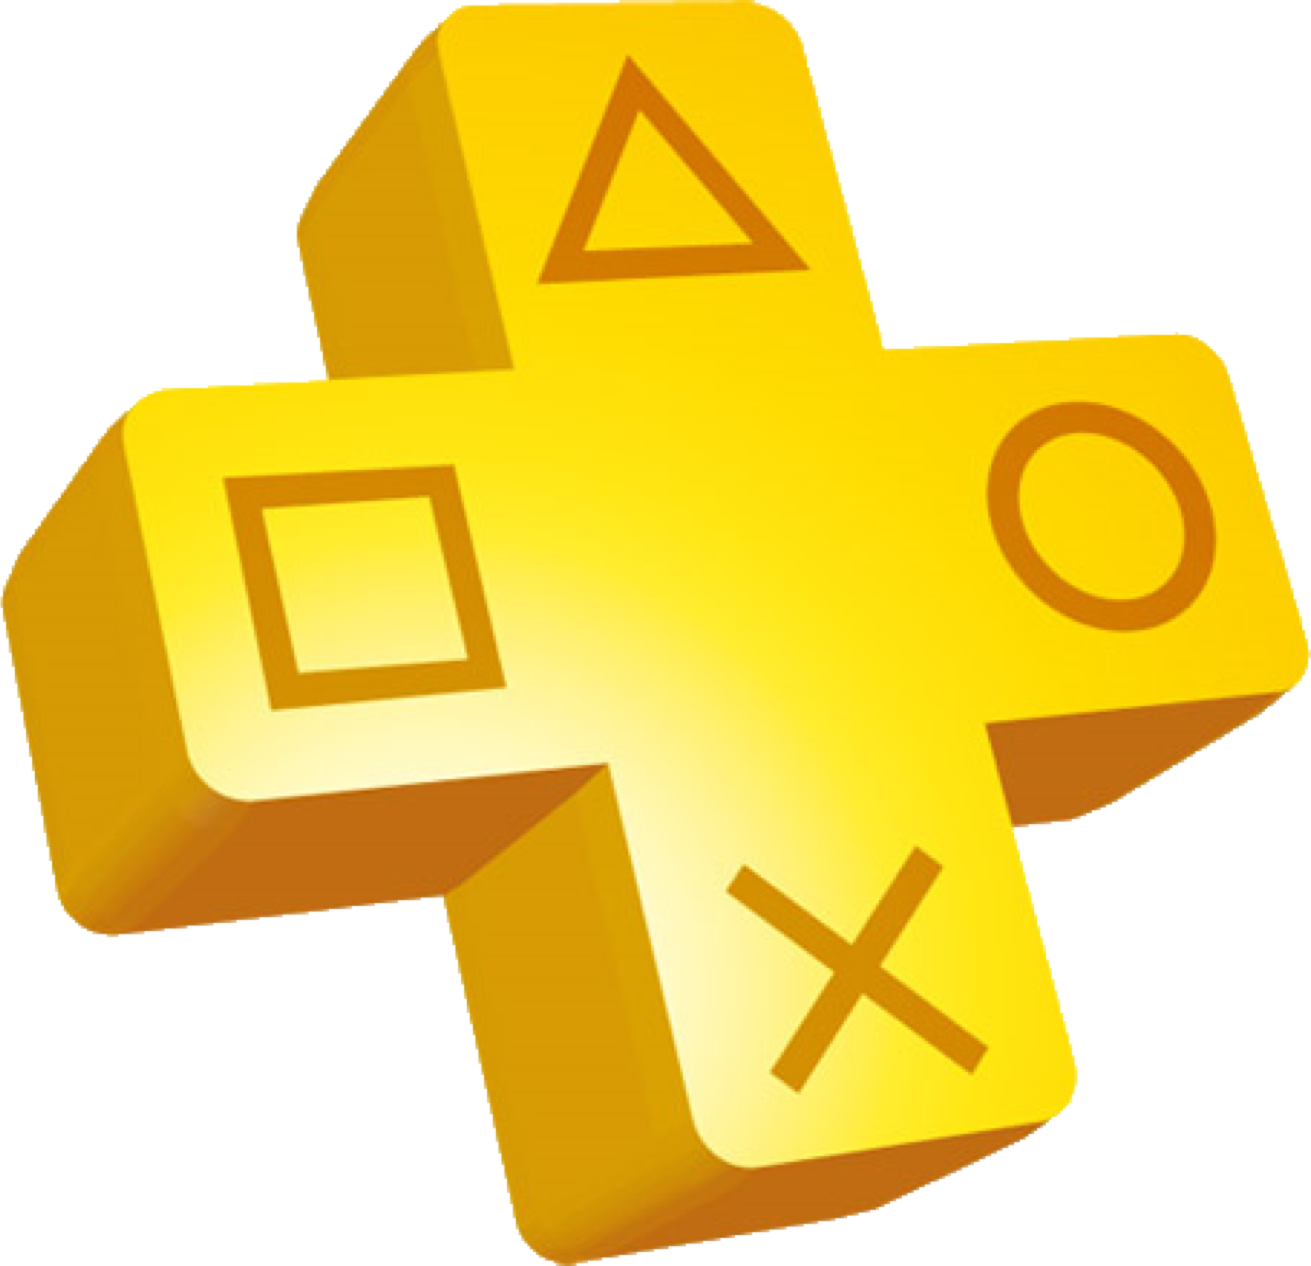 Playstation Symbol Angle Plus Free Clipart HQ PNG Image